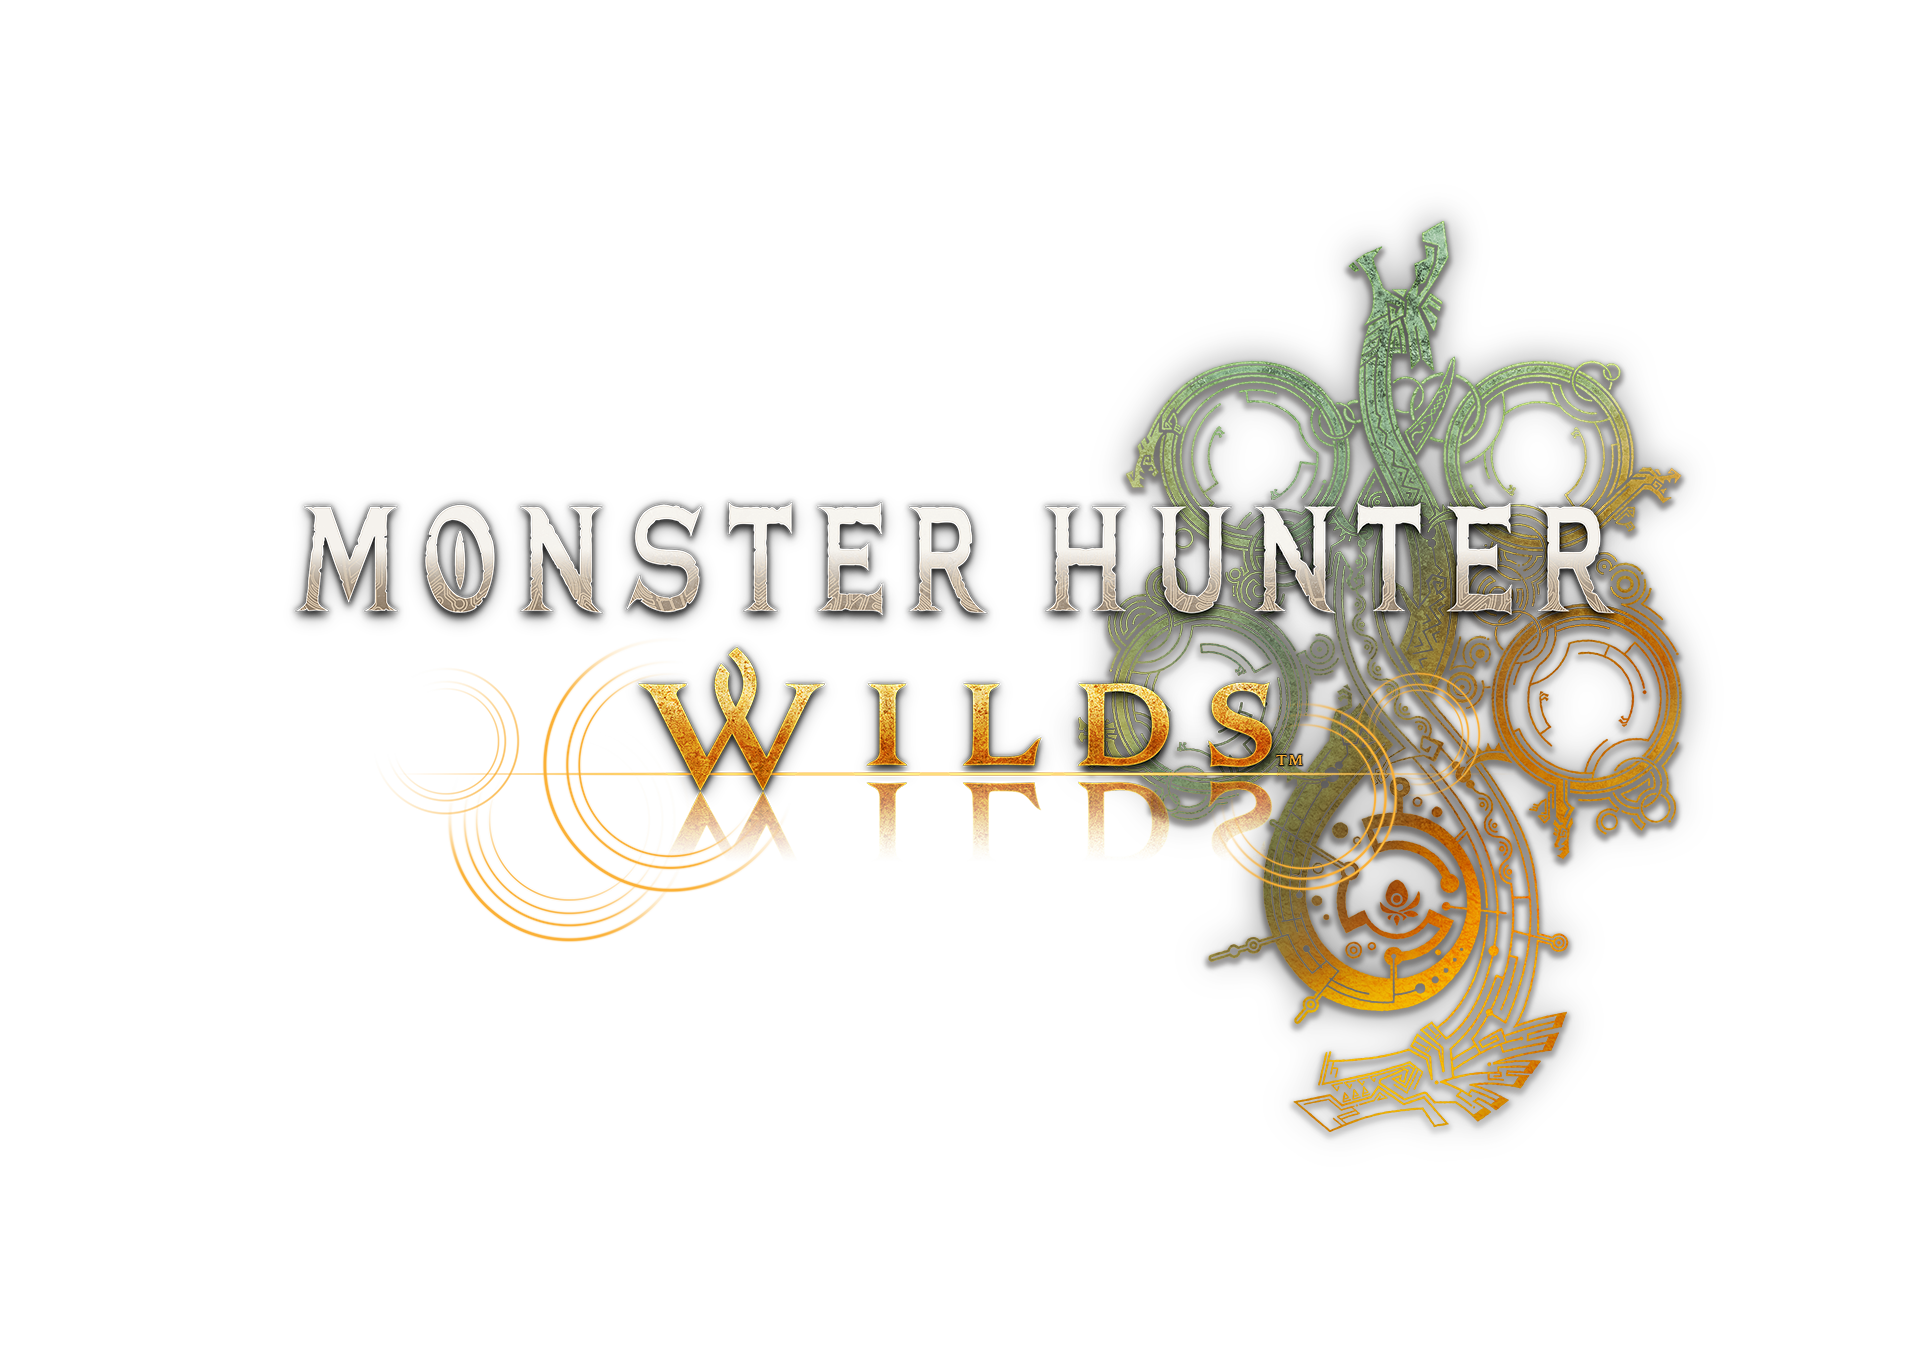 Capcom's next big Monster Hunter game is Wilds, coming in 2025